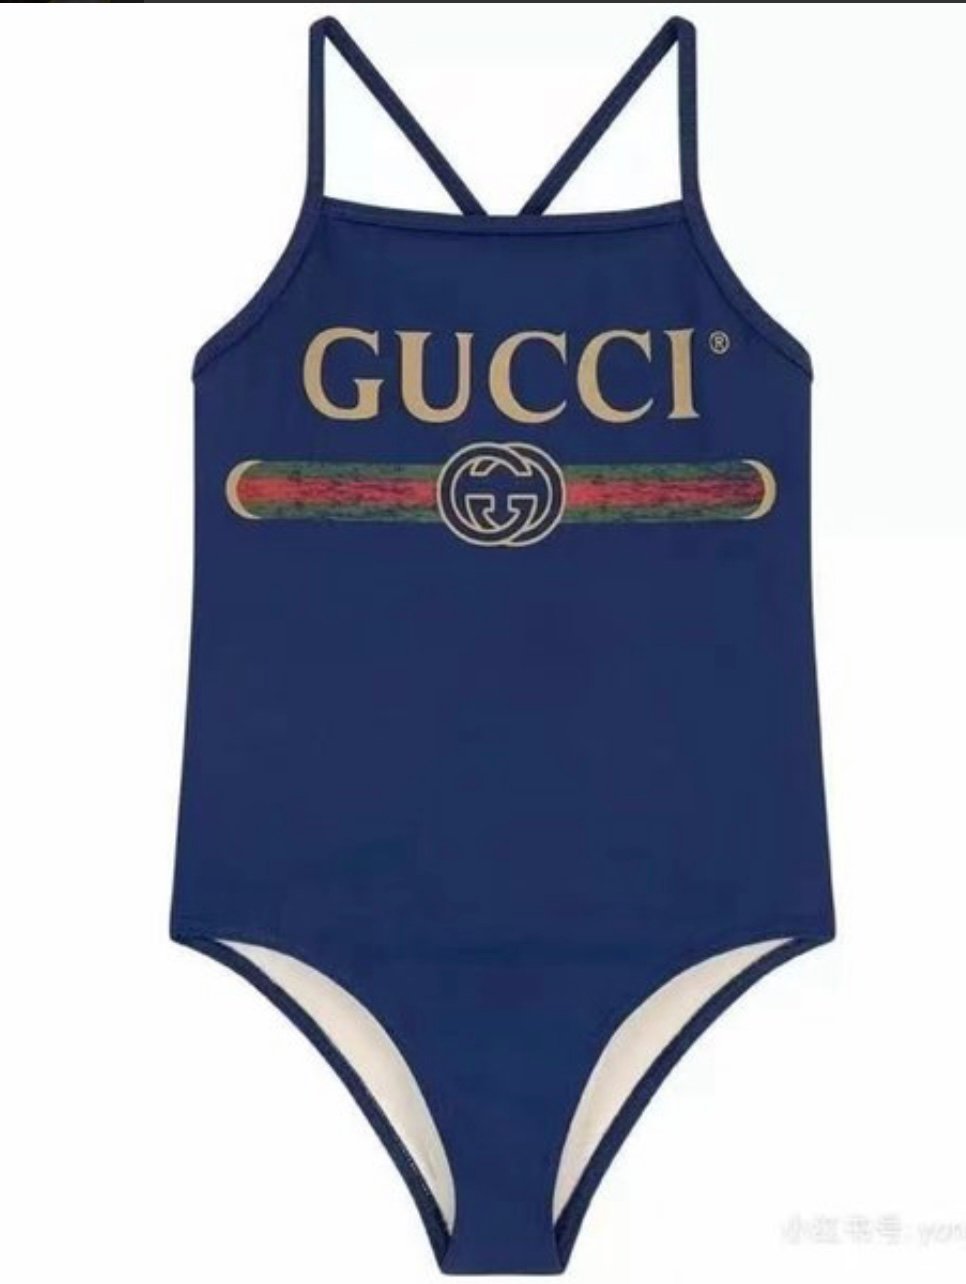 Image of Gg bathing suit 